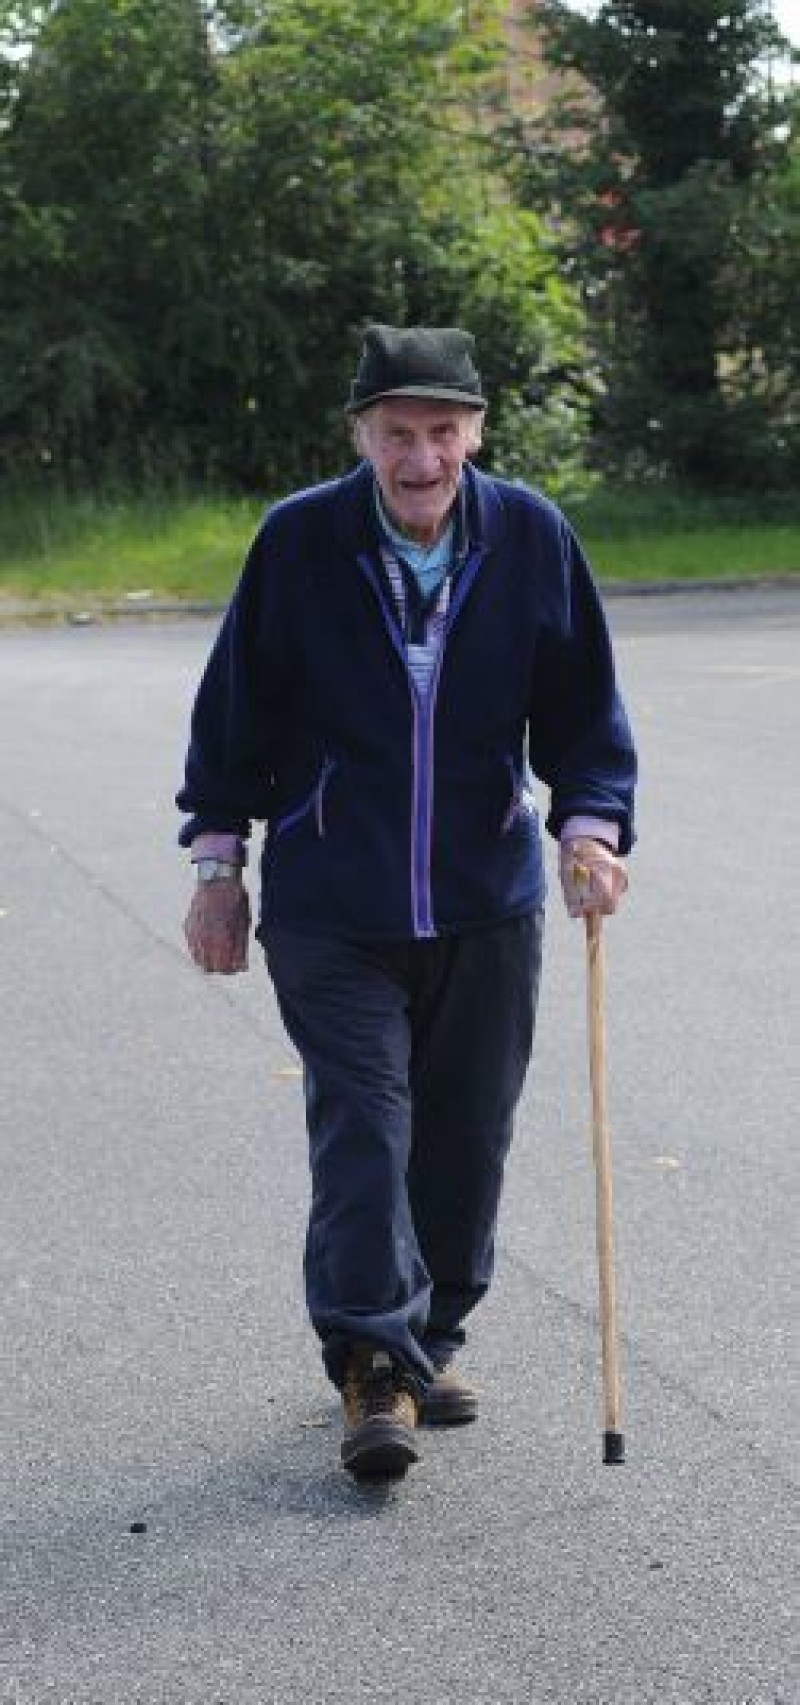 Other image for Alan’s boots are certainly made for walking  even at the age of 90...